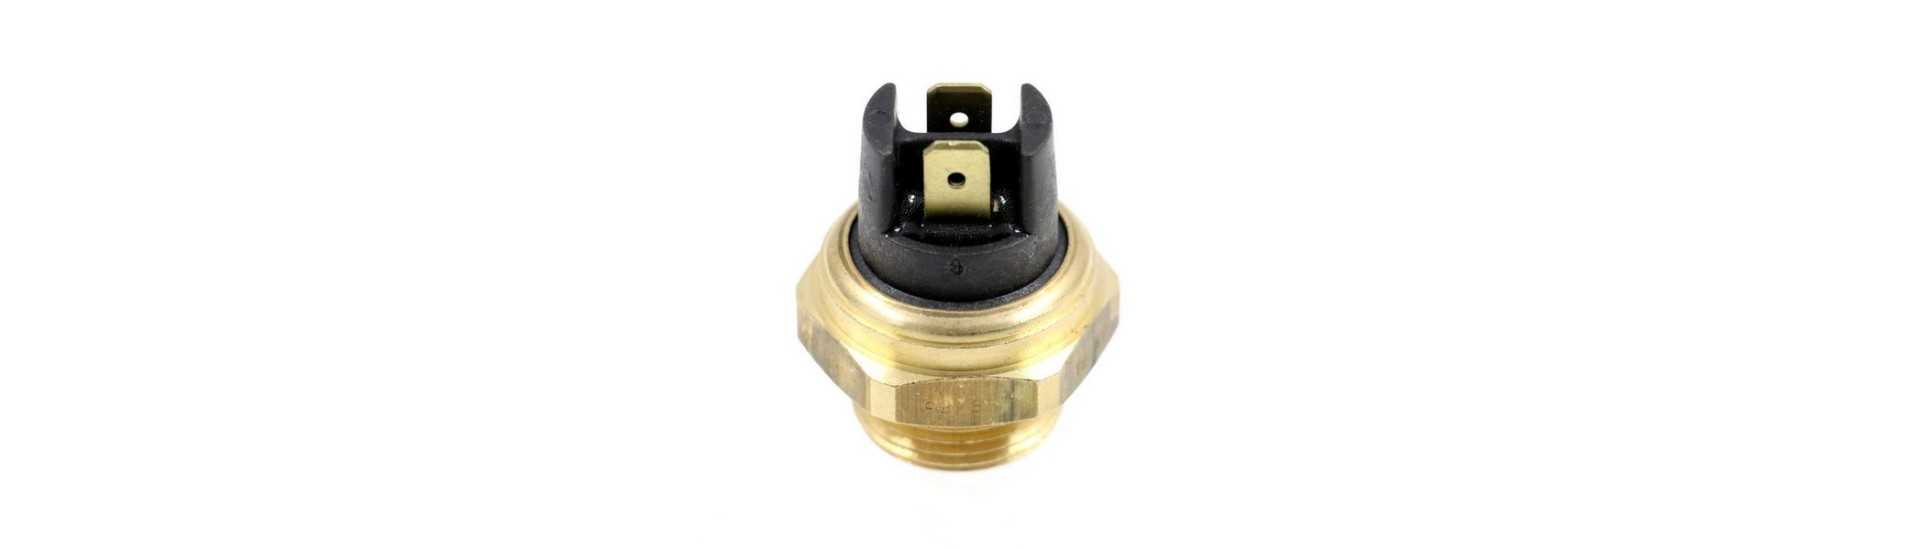 Best price temperature sensor for car without a permit